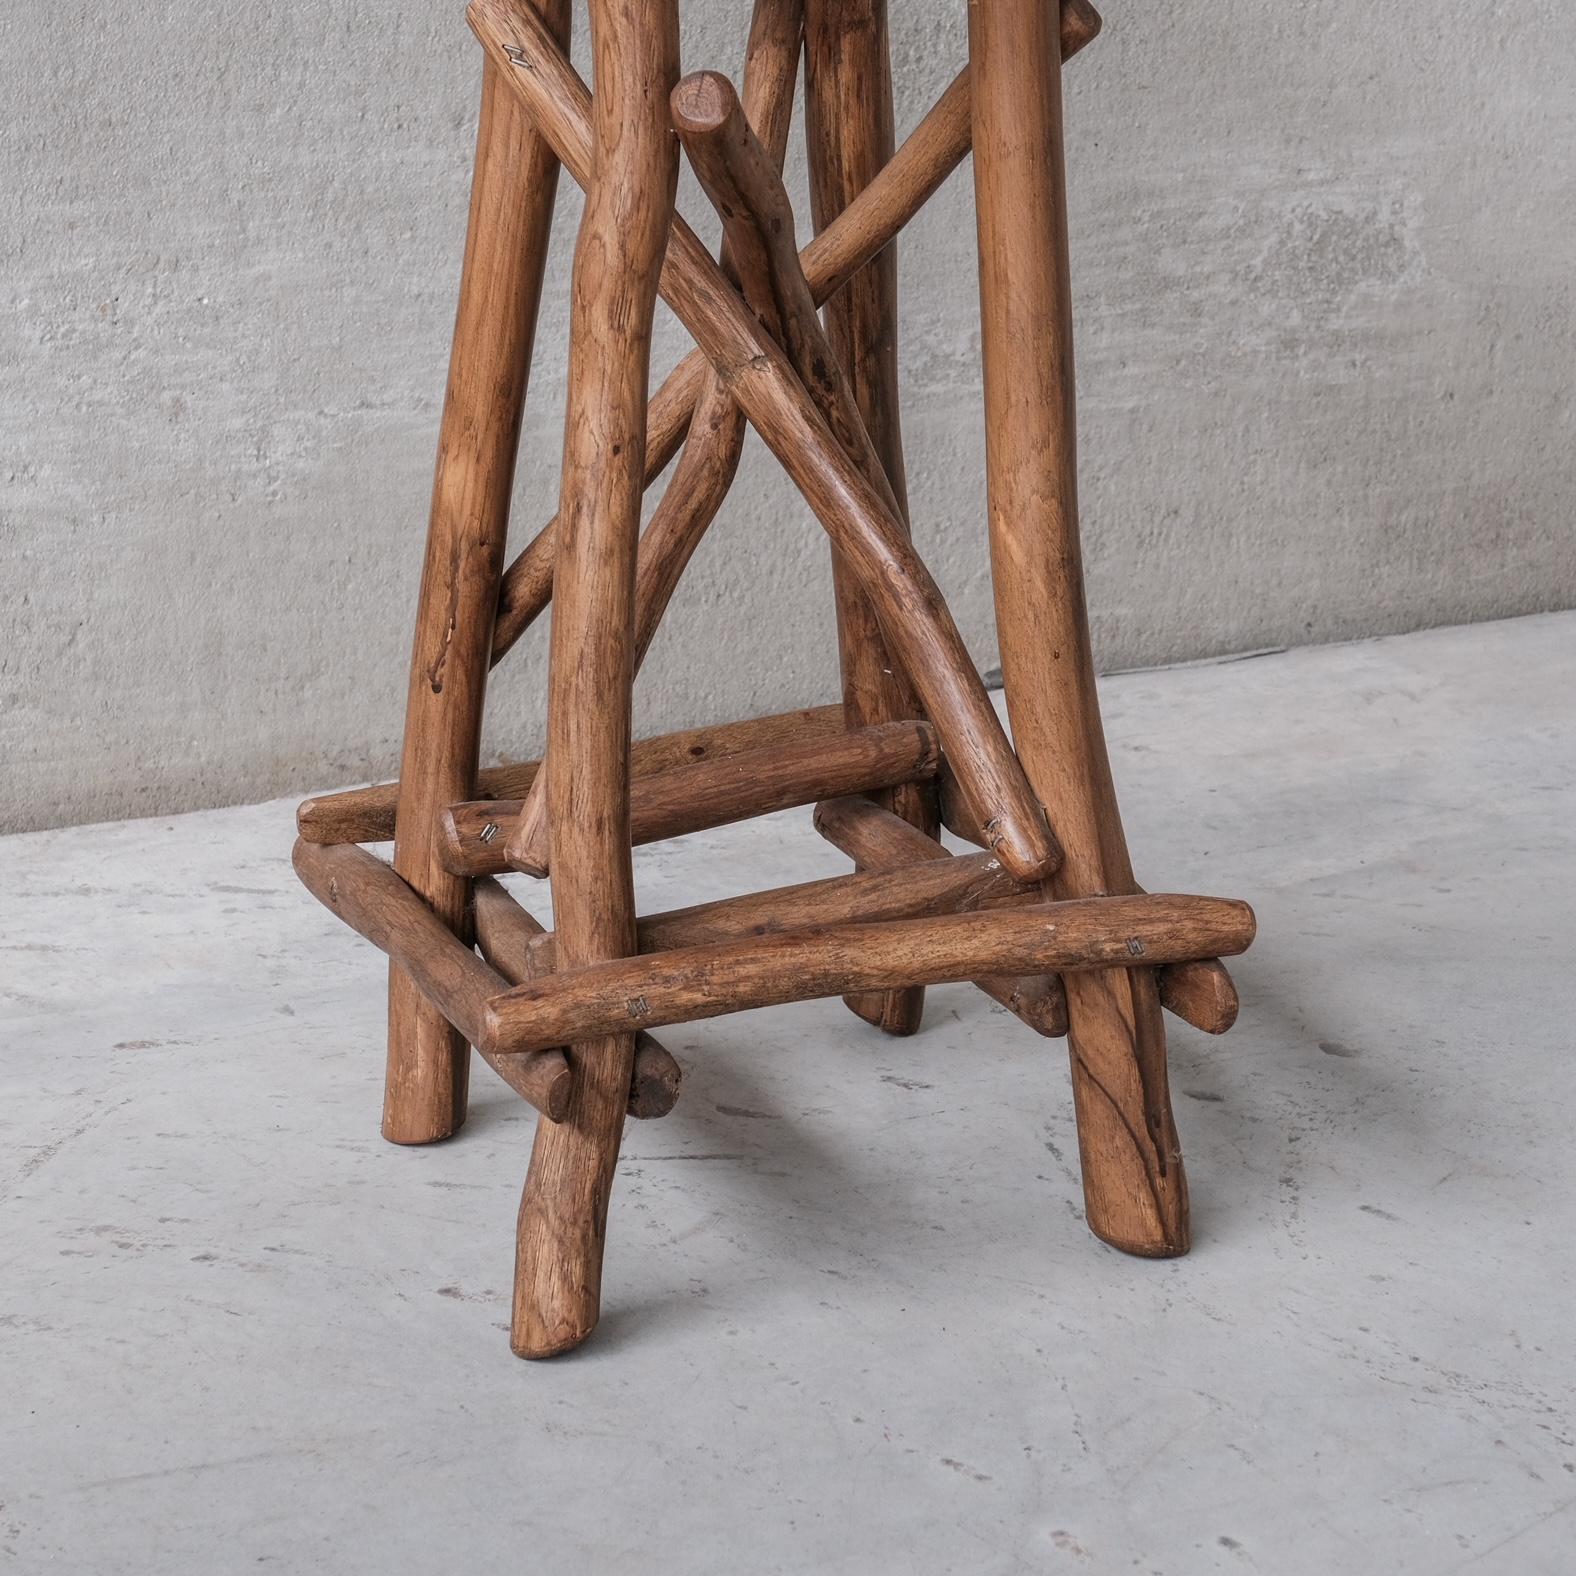 Belgian Wooden Midcentury Bar Stool or Sculpture Pedestal in Adirondack Style '6 Availa' For Sale